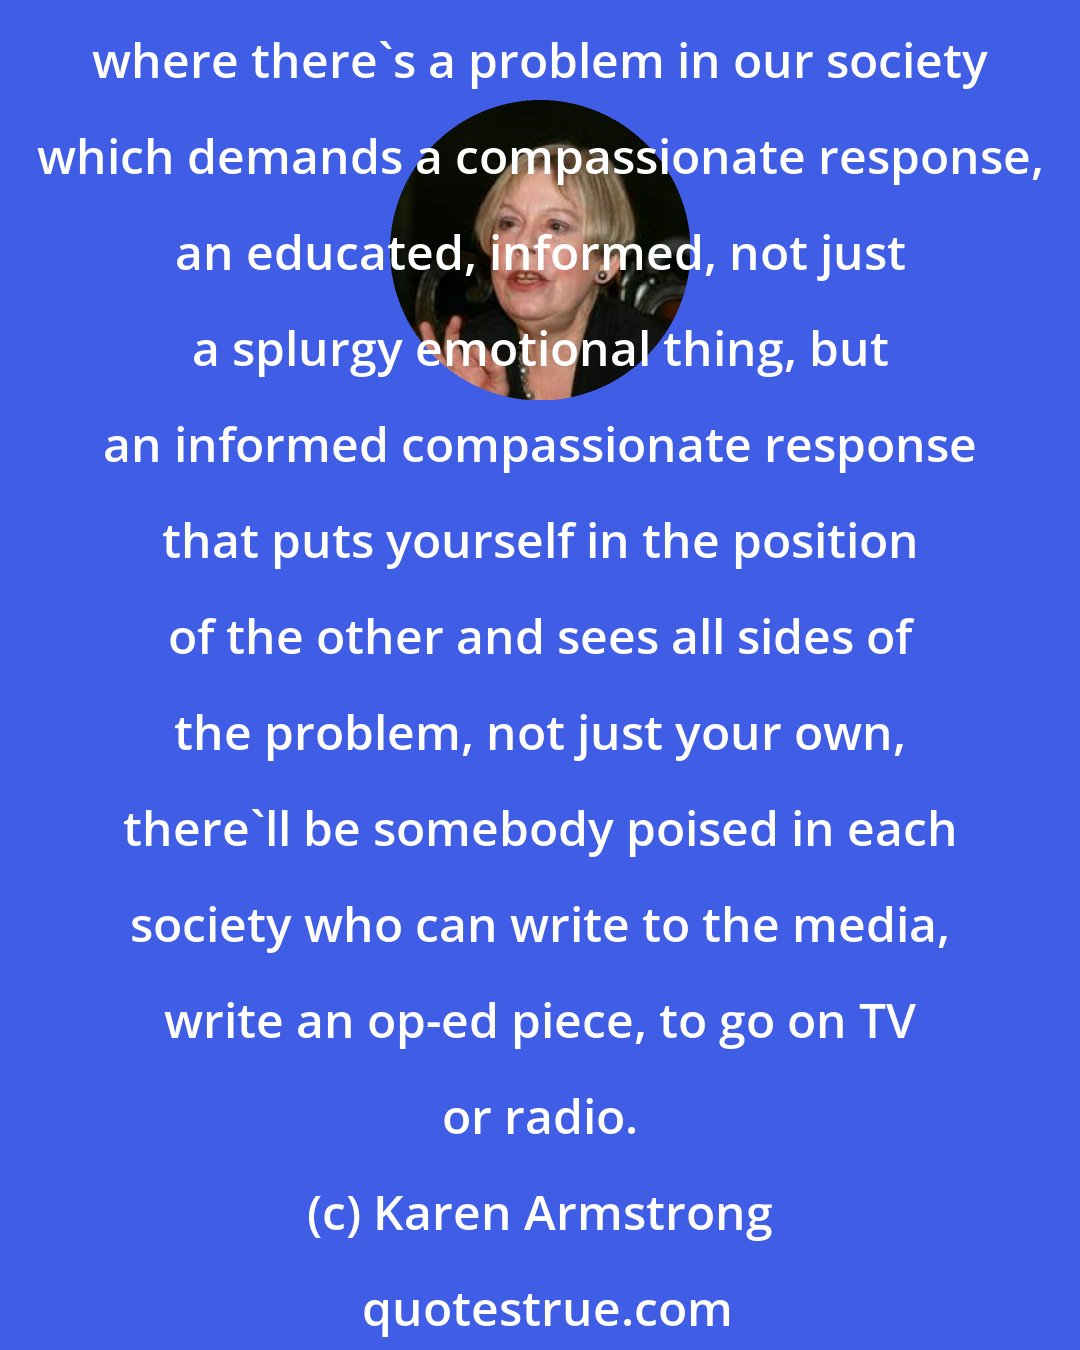 Karen Armstrong: I want to create a rapid response team, right around the world, perhaps starting originally with our partners, similar to the one we have in the United Nations whereby, where there's a problem in our society which demands a compassionate response, an educated, informed, not just a splurgy emotional thing, but an informed compassionate response that puts yourself in the position of the other and sees all sides of the problem, not just your own, there'll be somebody poised in each society who can write to the media, write an op-ed piece, to go on TV or radio.